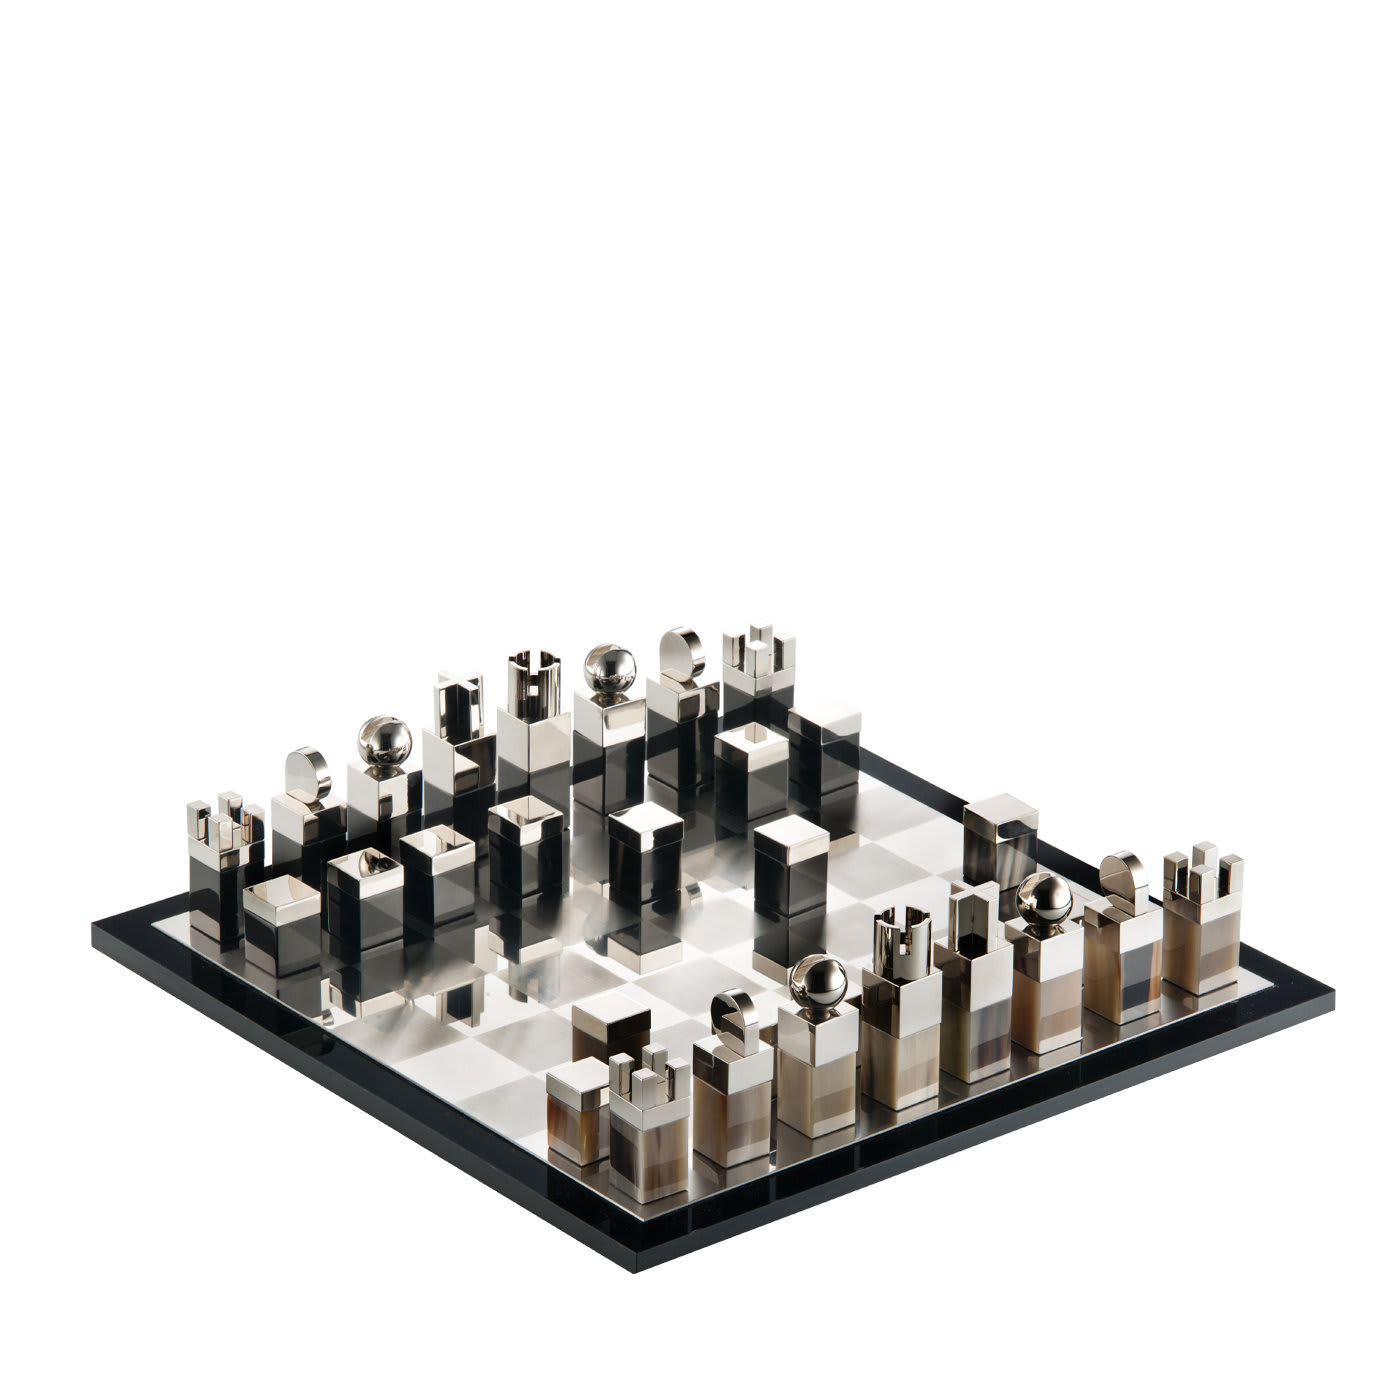 Nelson Chess Set by A. Andreucci - Arcahorn